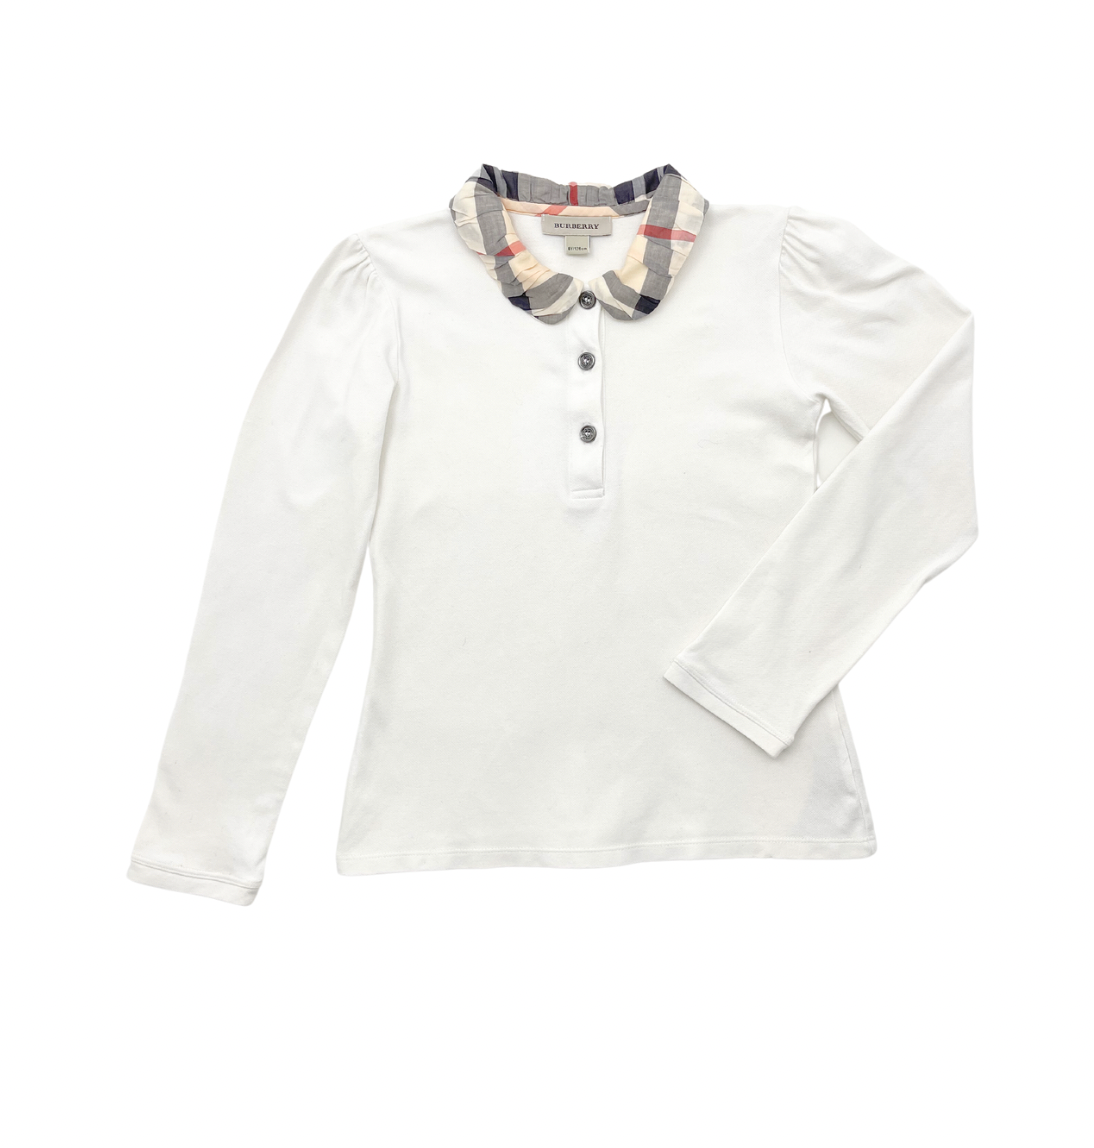 BURBERRY - Polo blanc manches longues - 8 ans